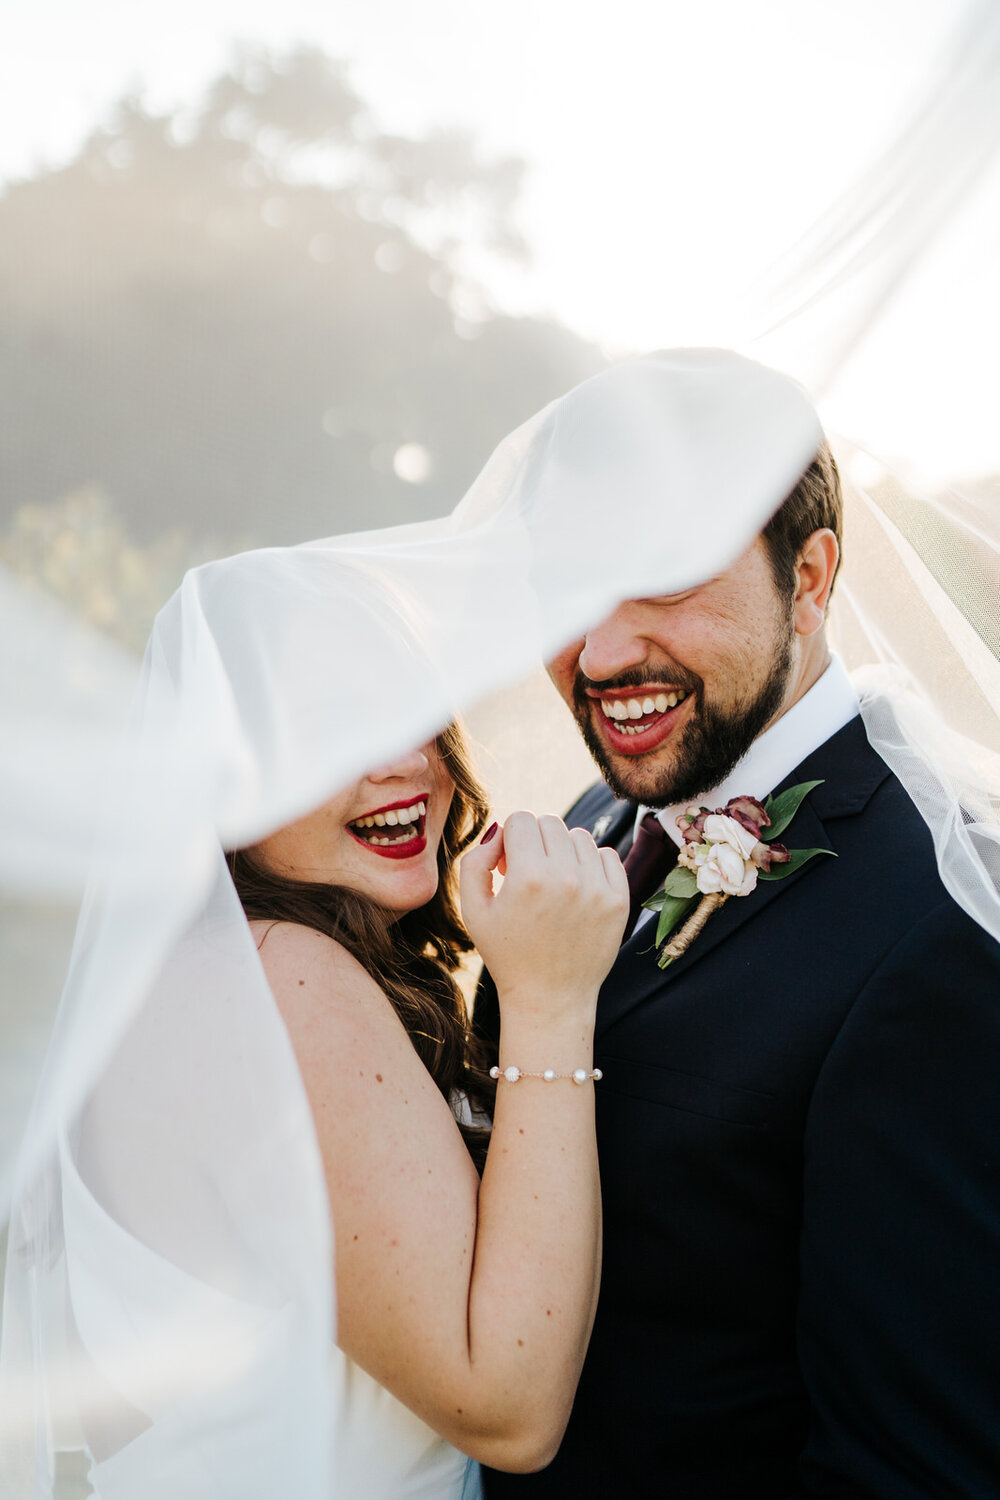 Bride and groom smile at camera as their eyes are covered by wedding veil